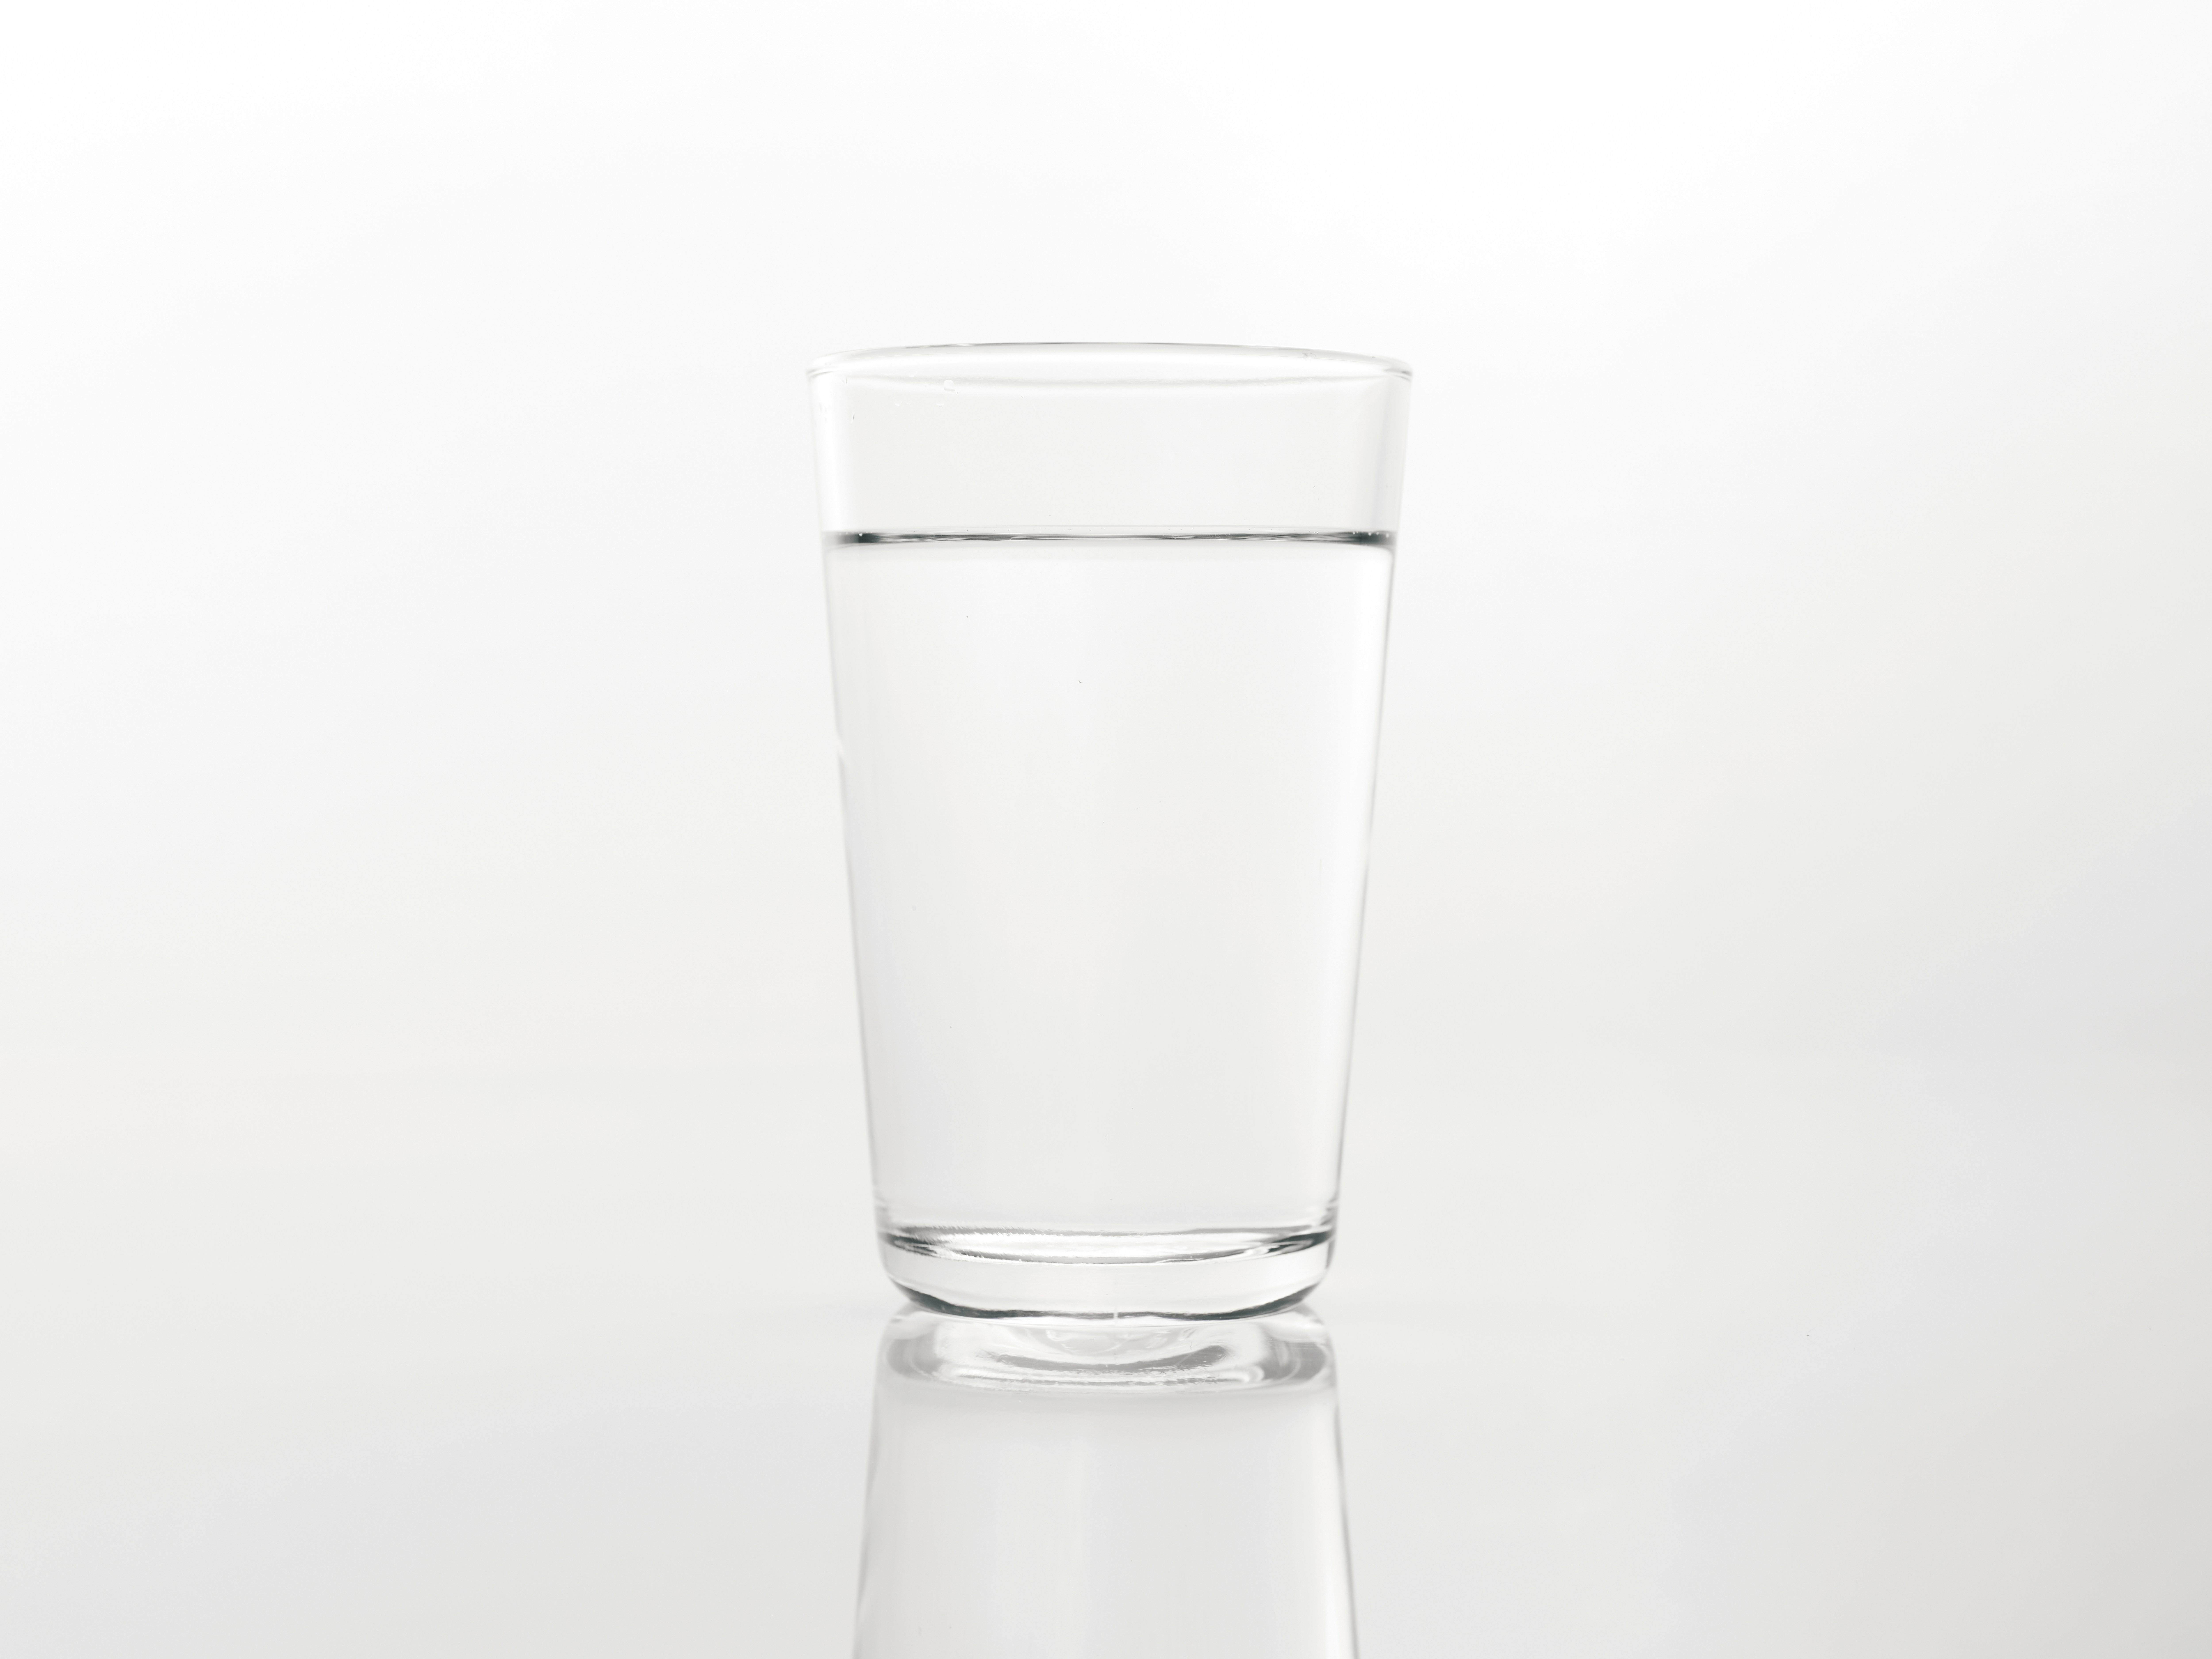 glass of water on a white background